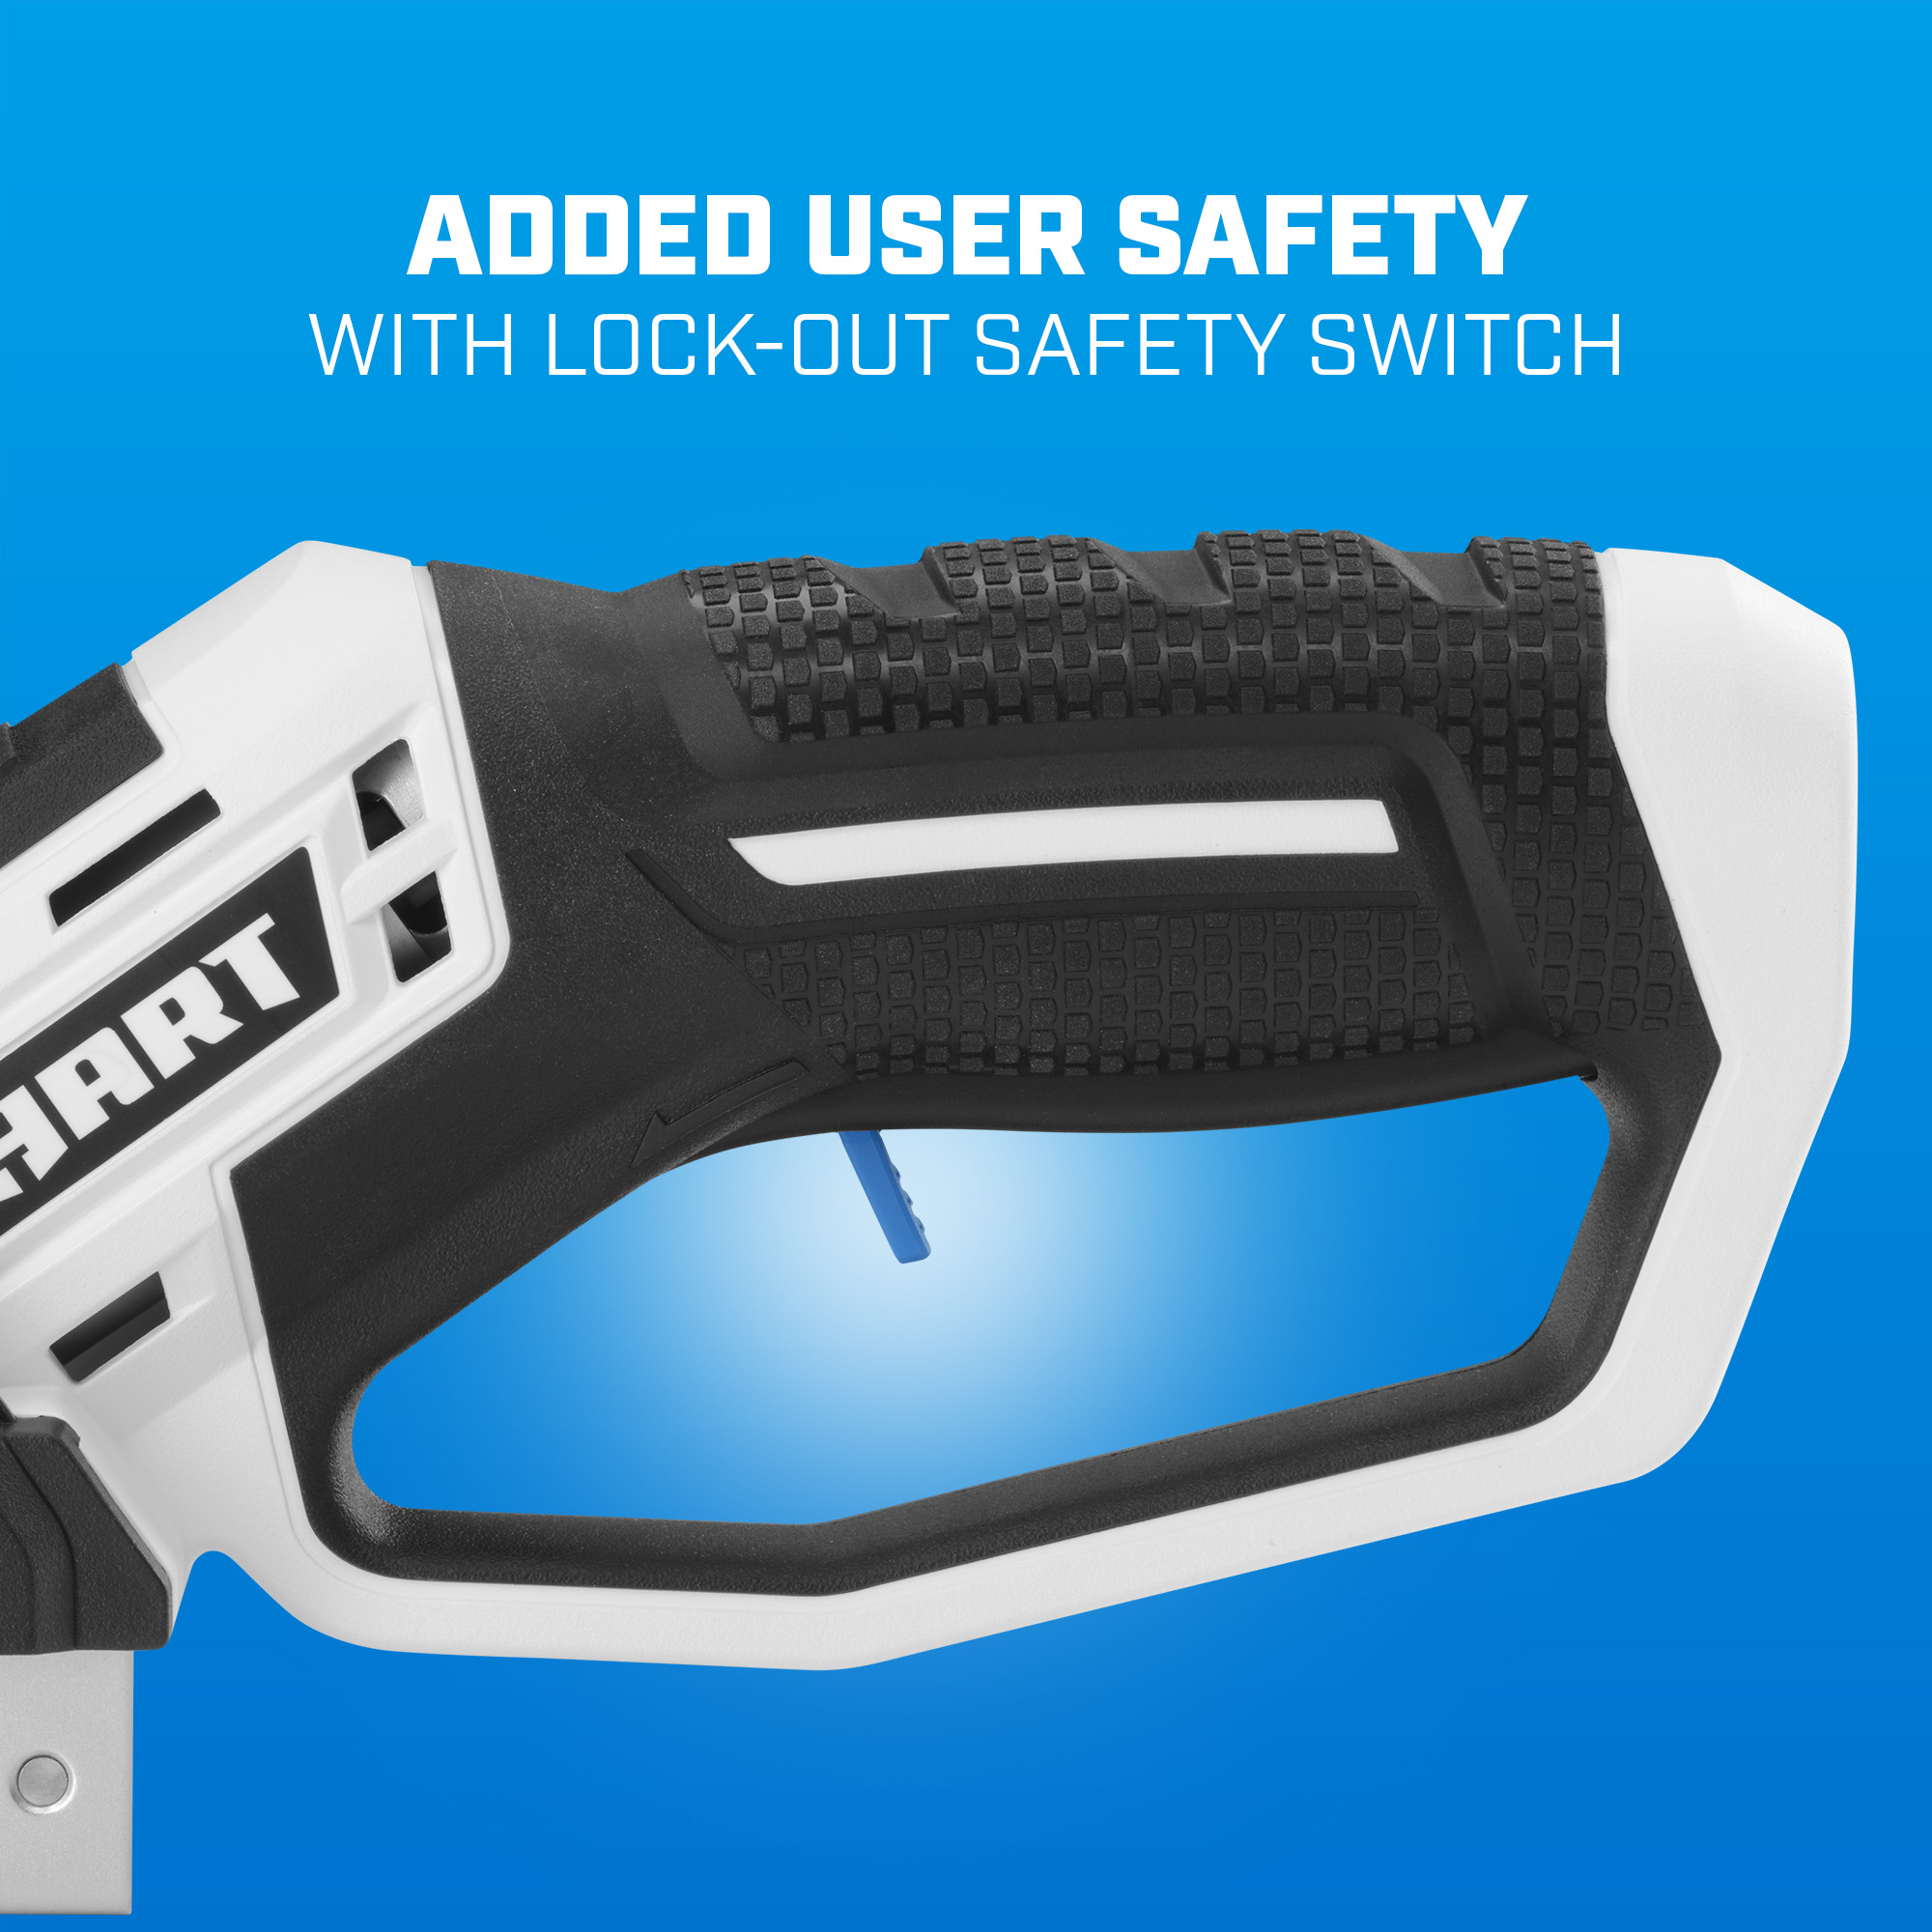 added user safety with lock-out safety switch